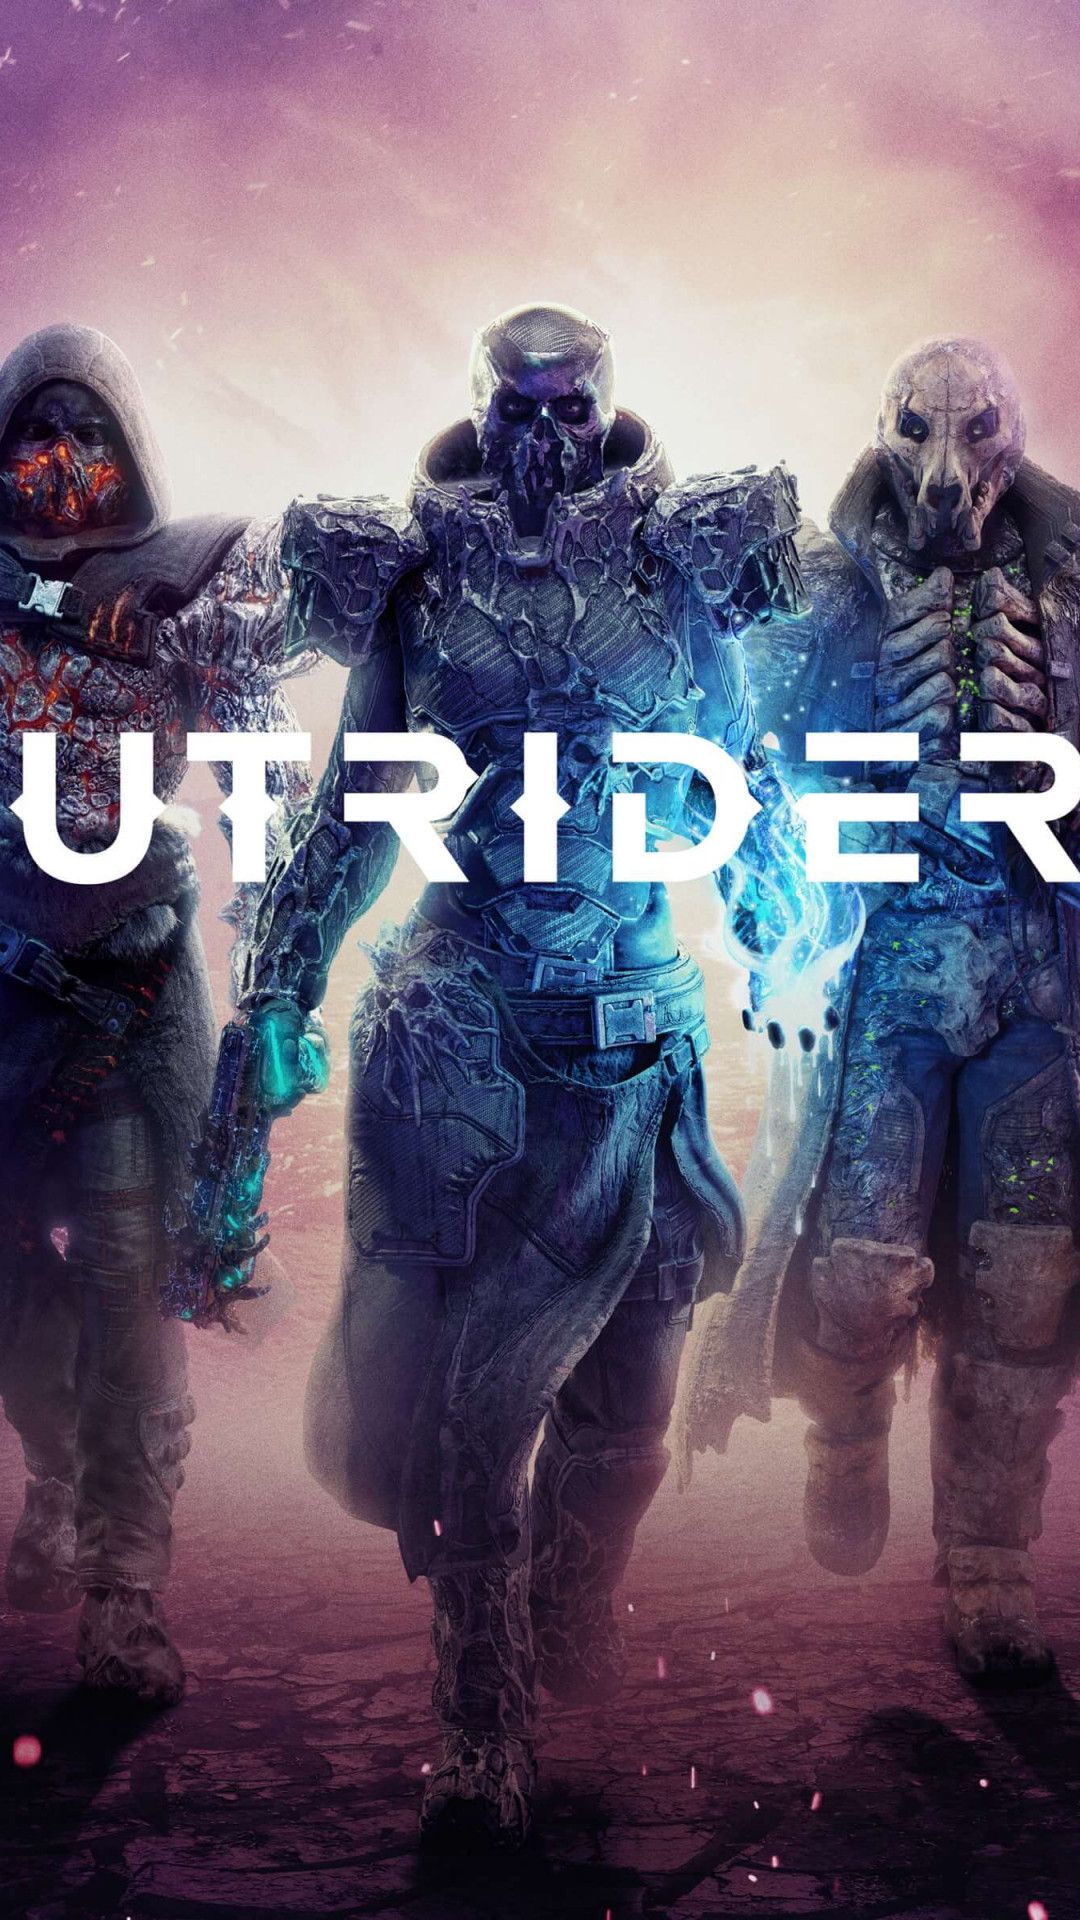 Download wallpaper Outriders.jpg